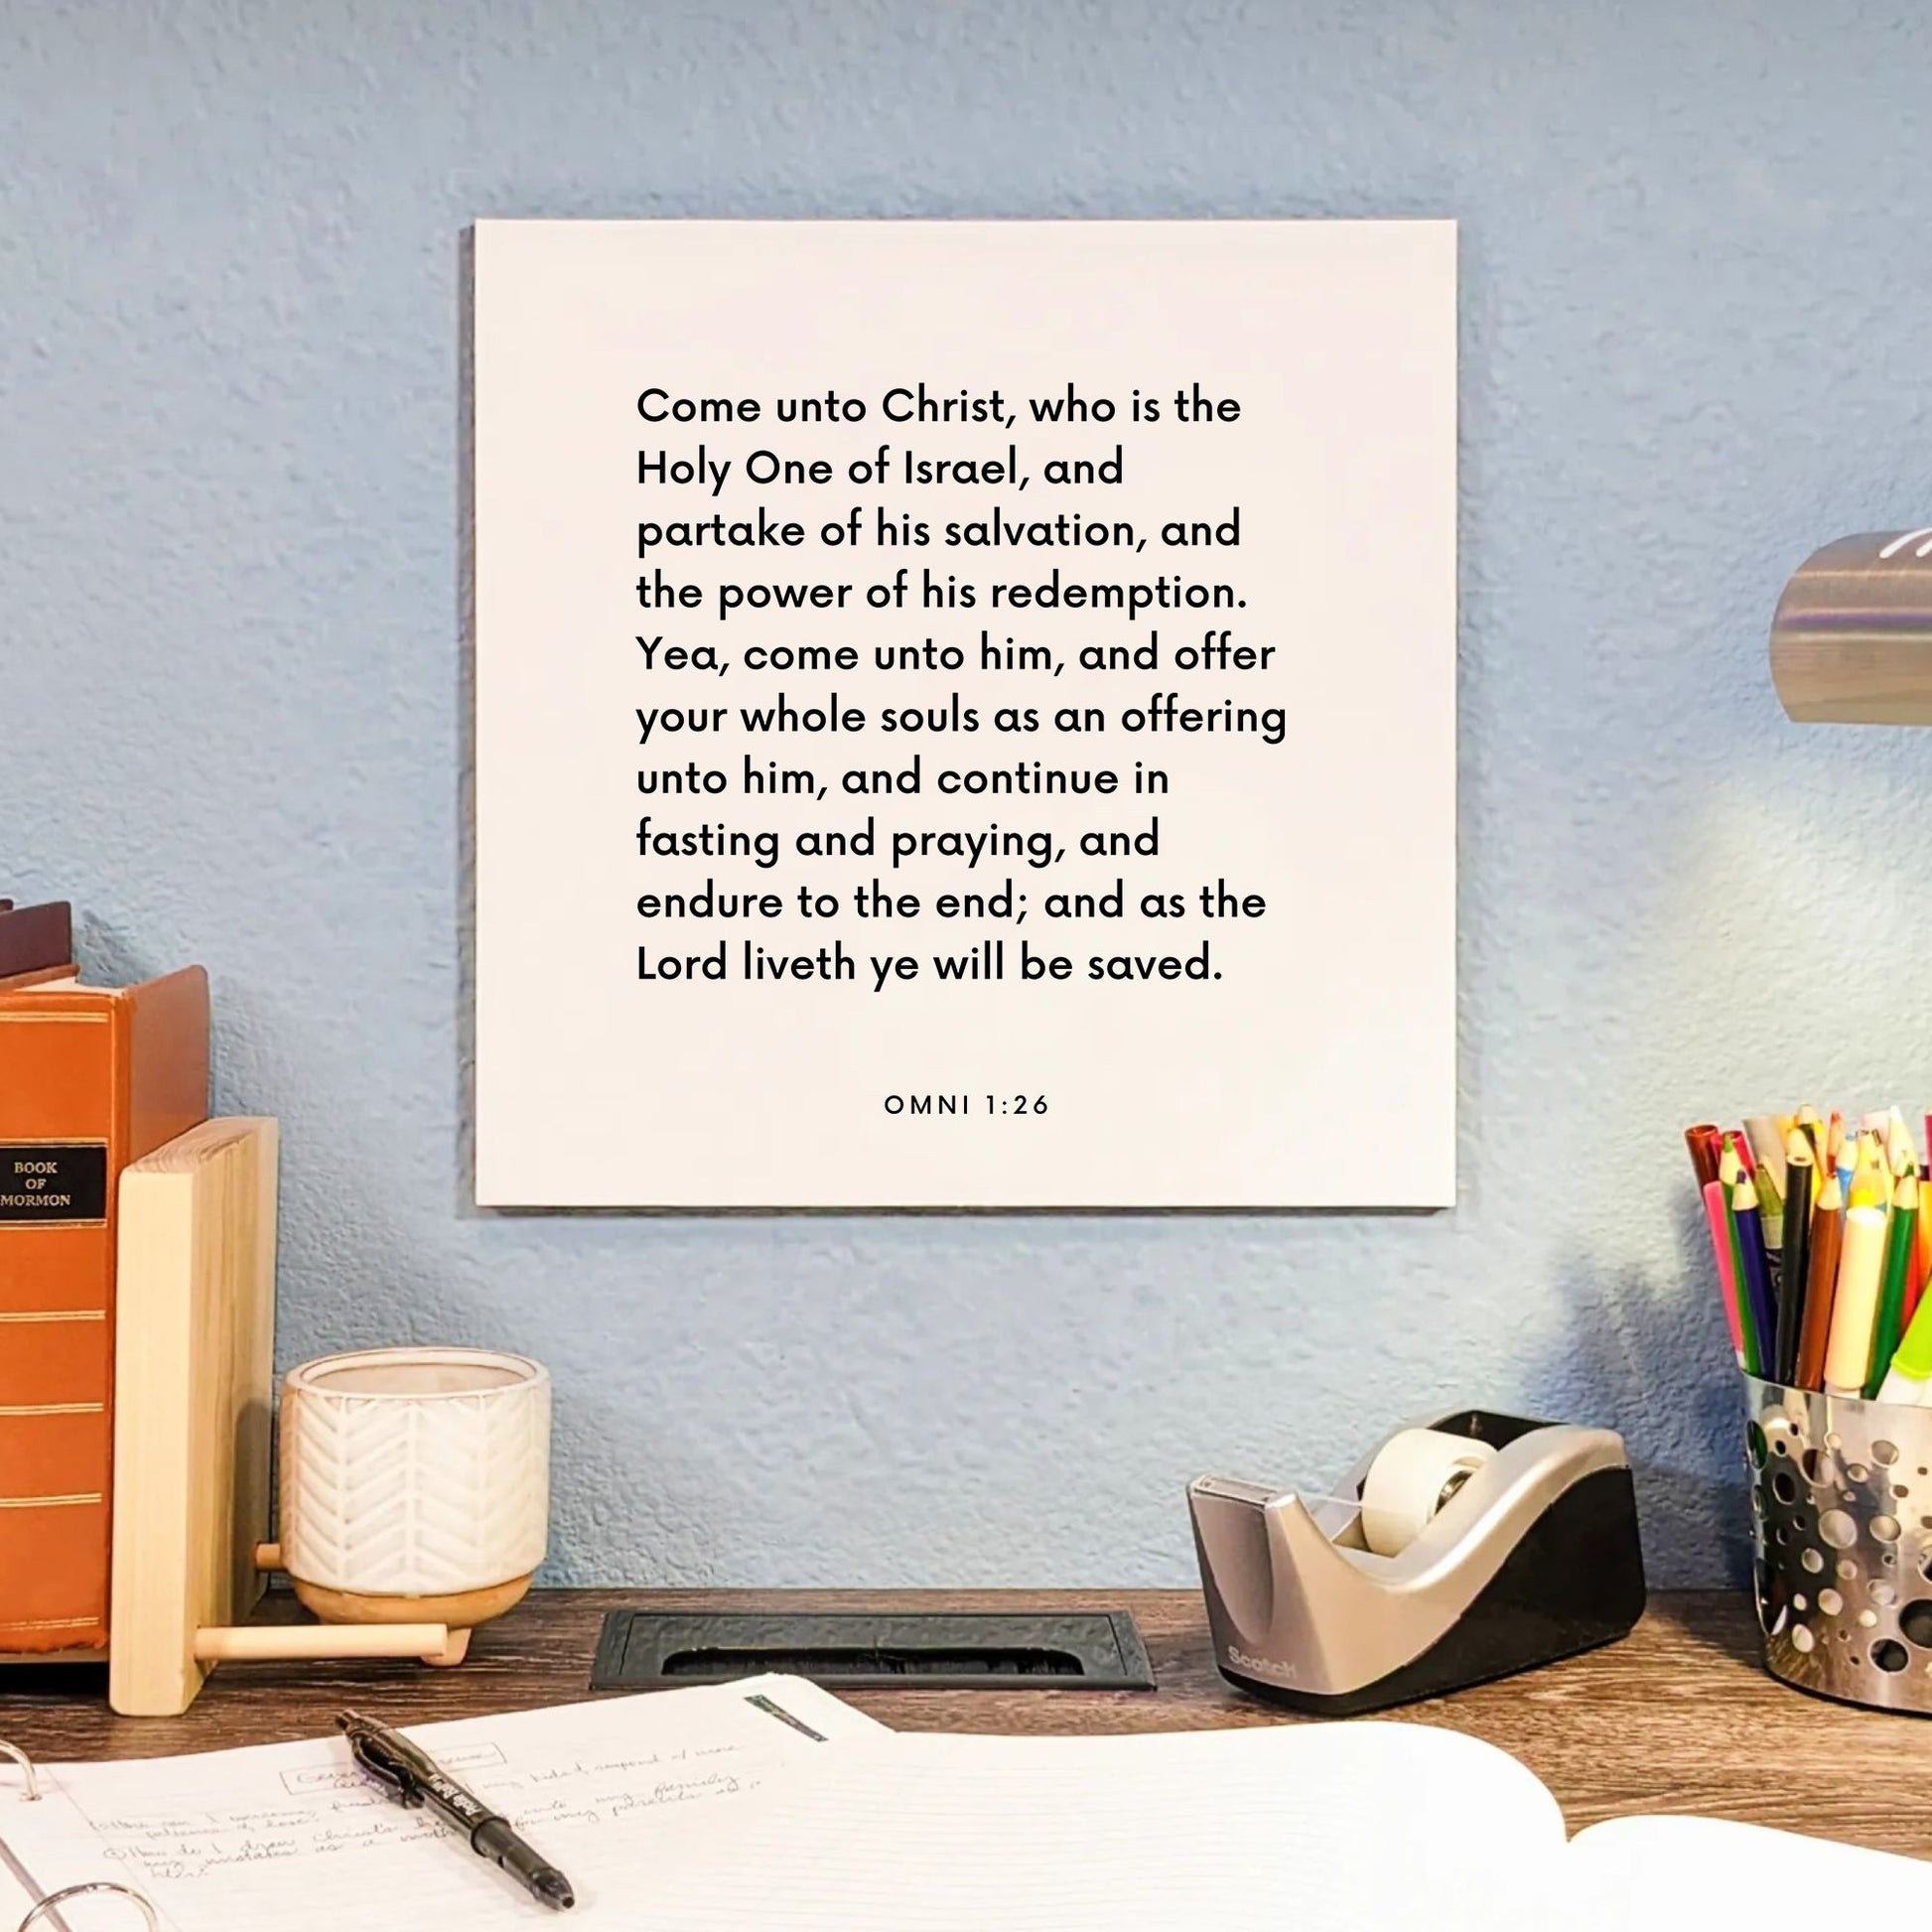 Desk mouting of the scripture tile for Omni 1:26 - "Offer your whole souls as an offering unto him"